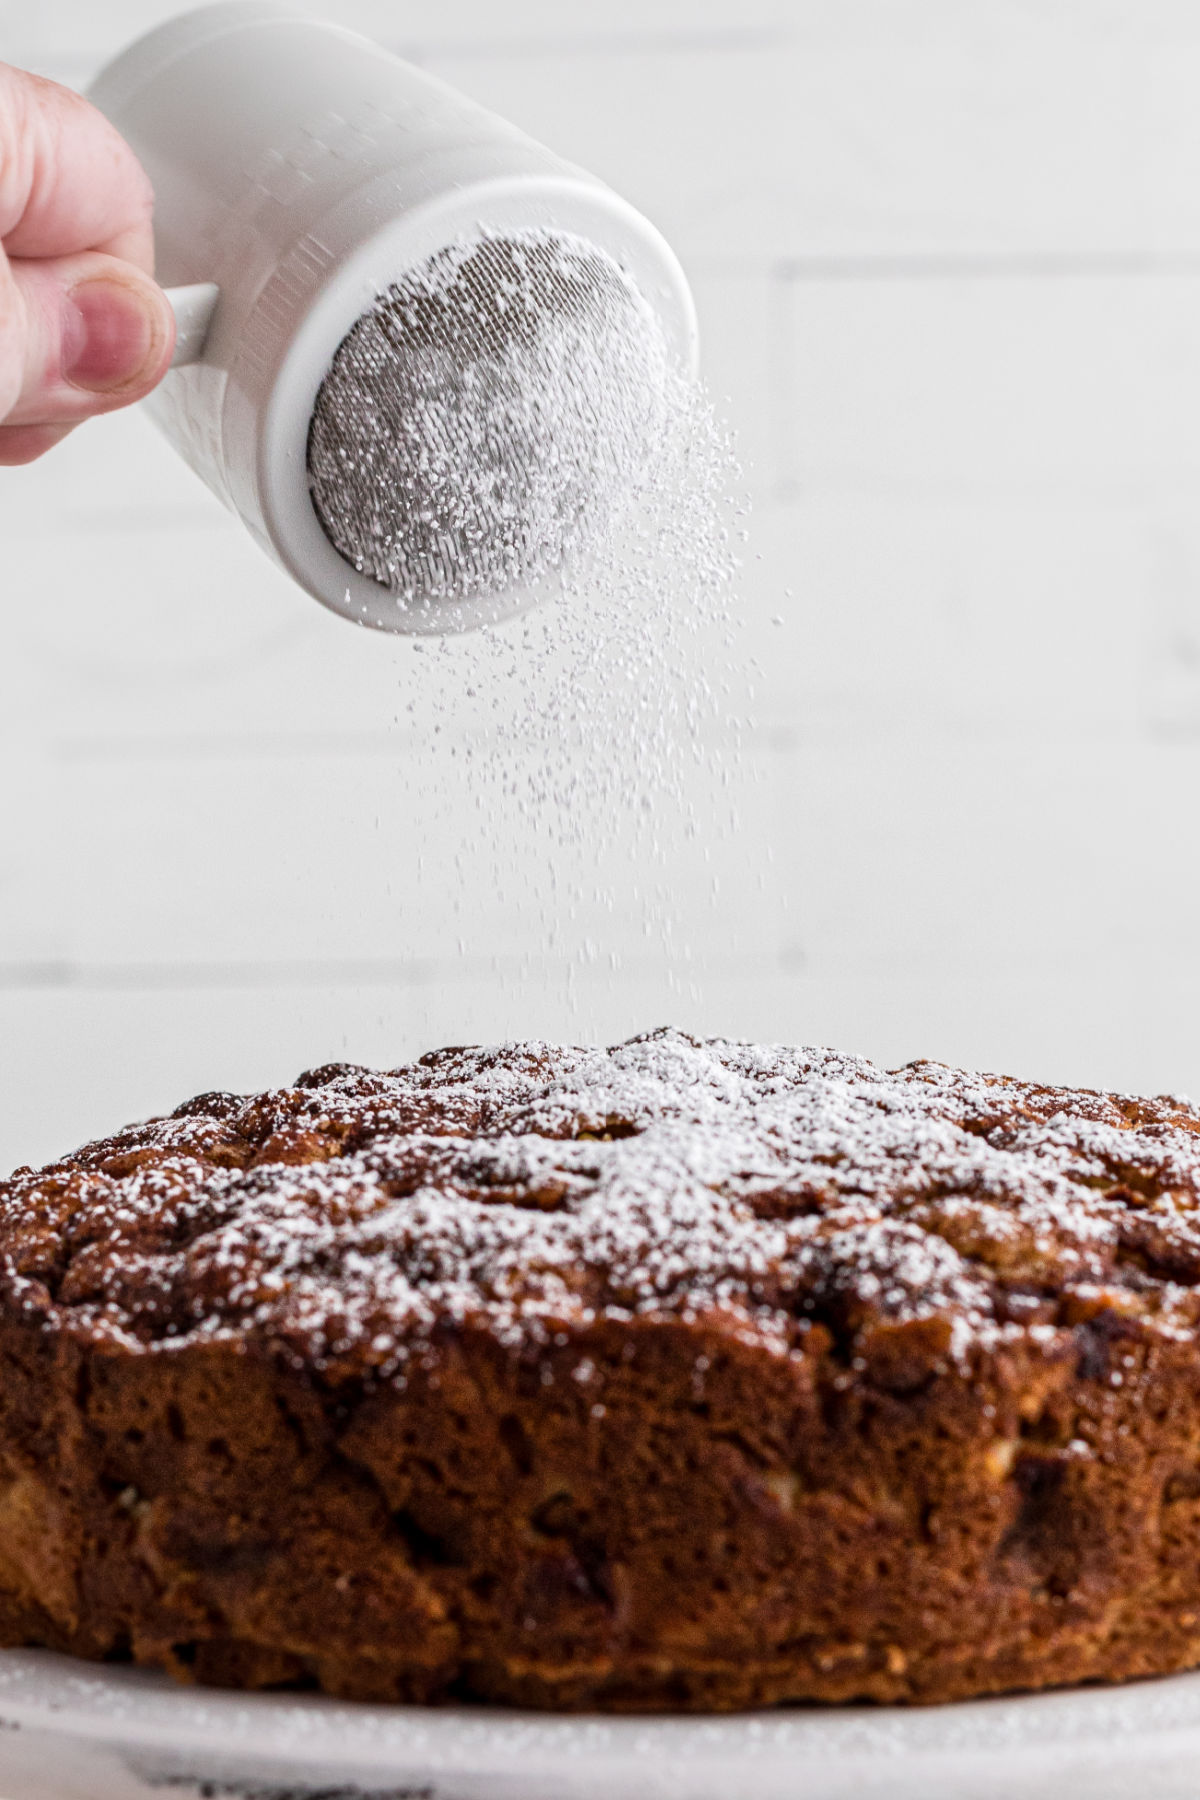 Sprinkling powdered sugar over the finished cake.